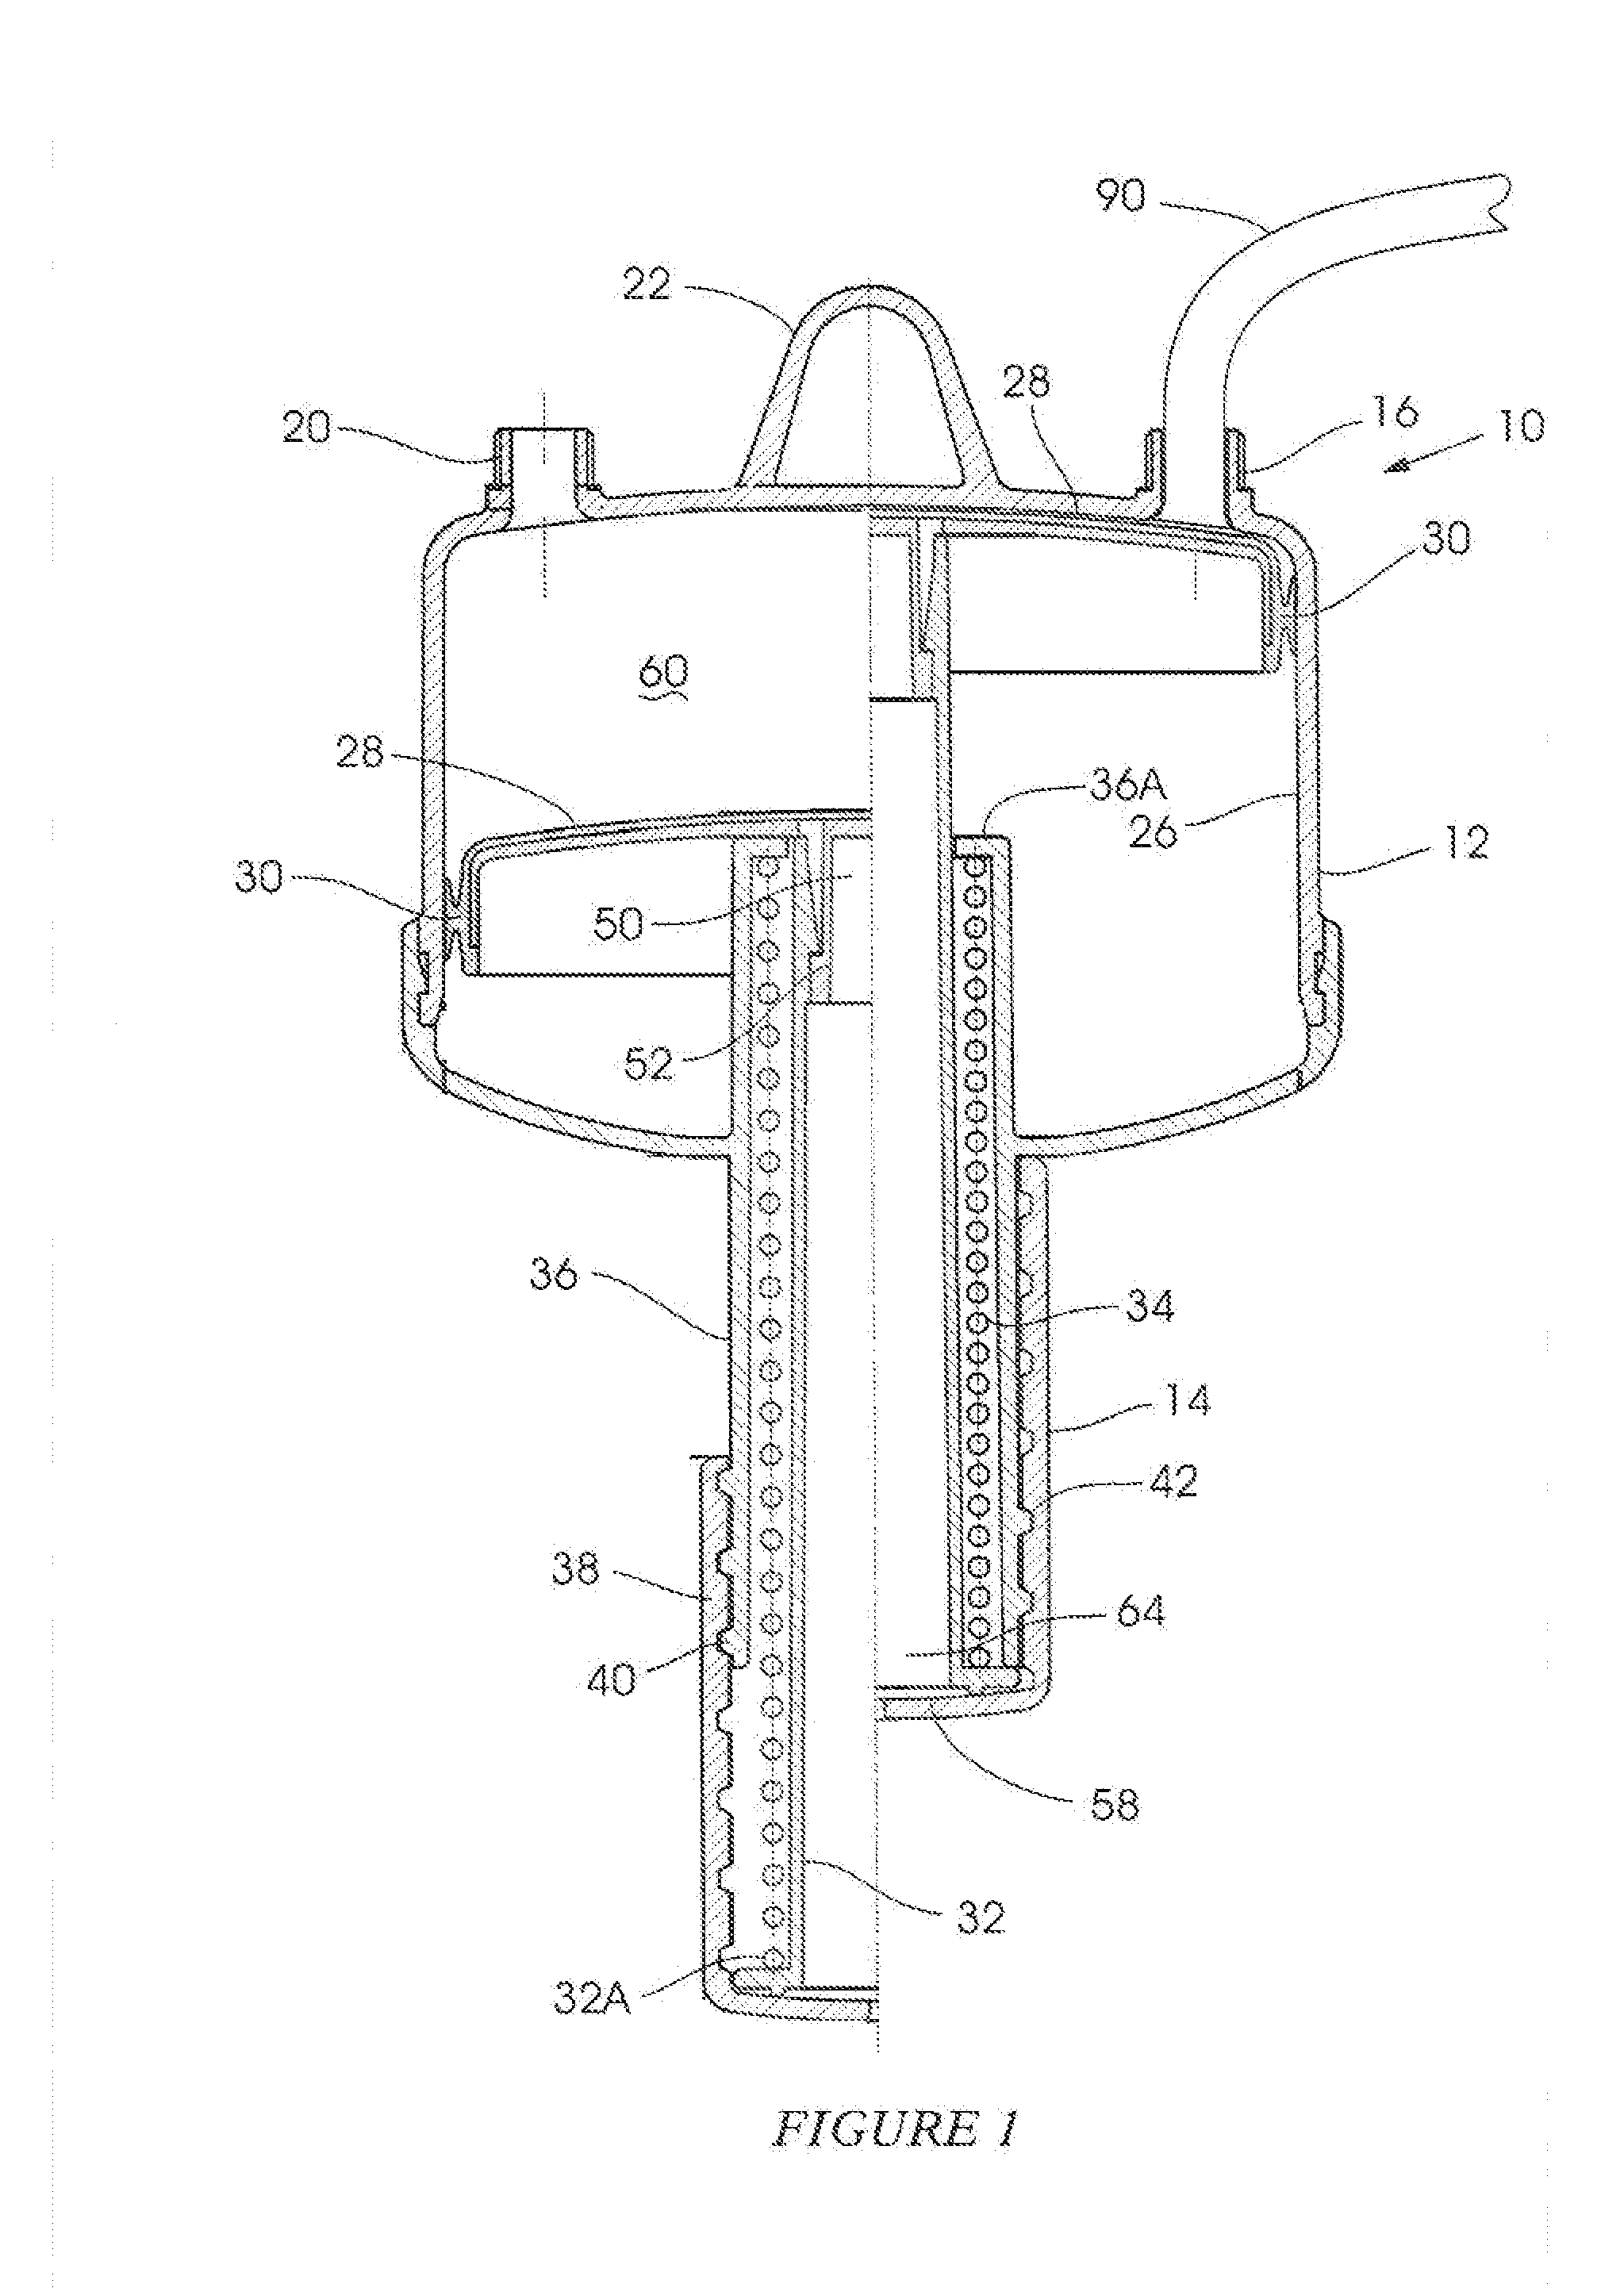 Fluid drainage container